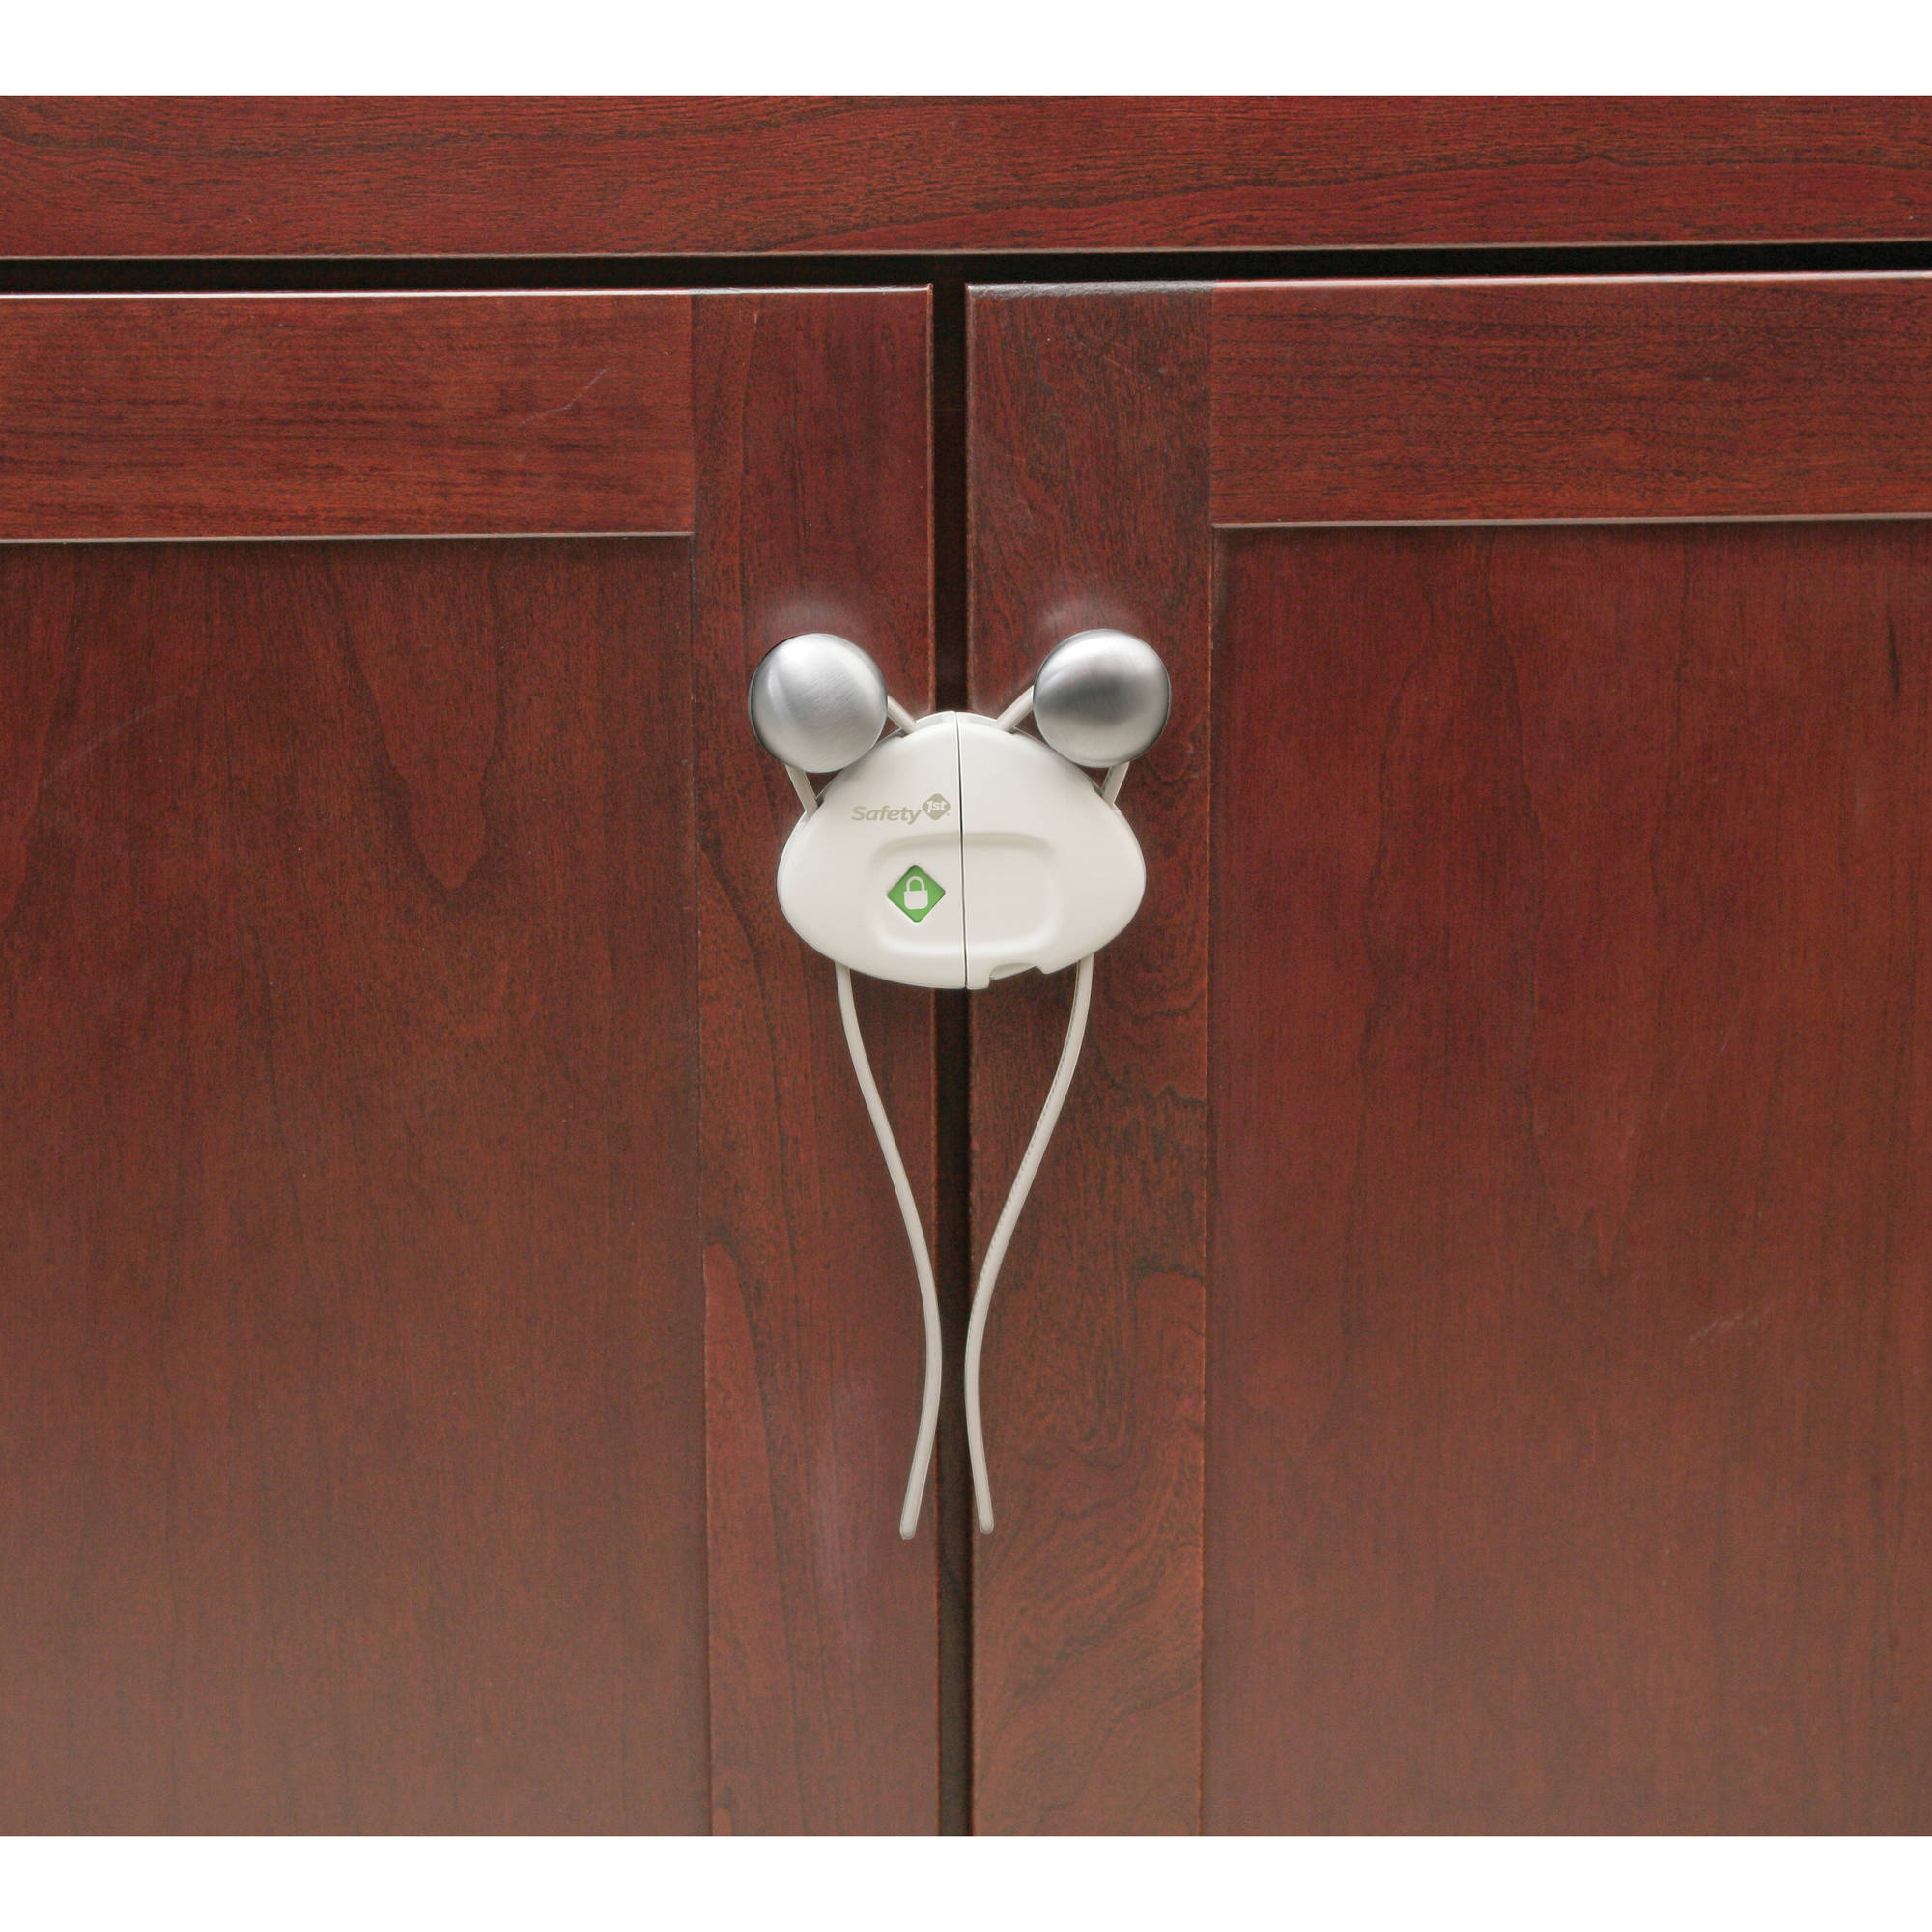 Safety 1st® Side by Side Cabinet Lock - 2pk - image 2 of 2